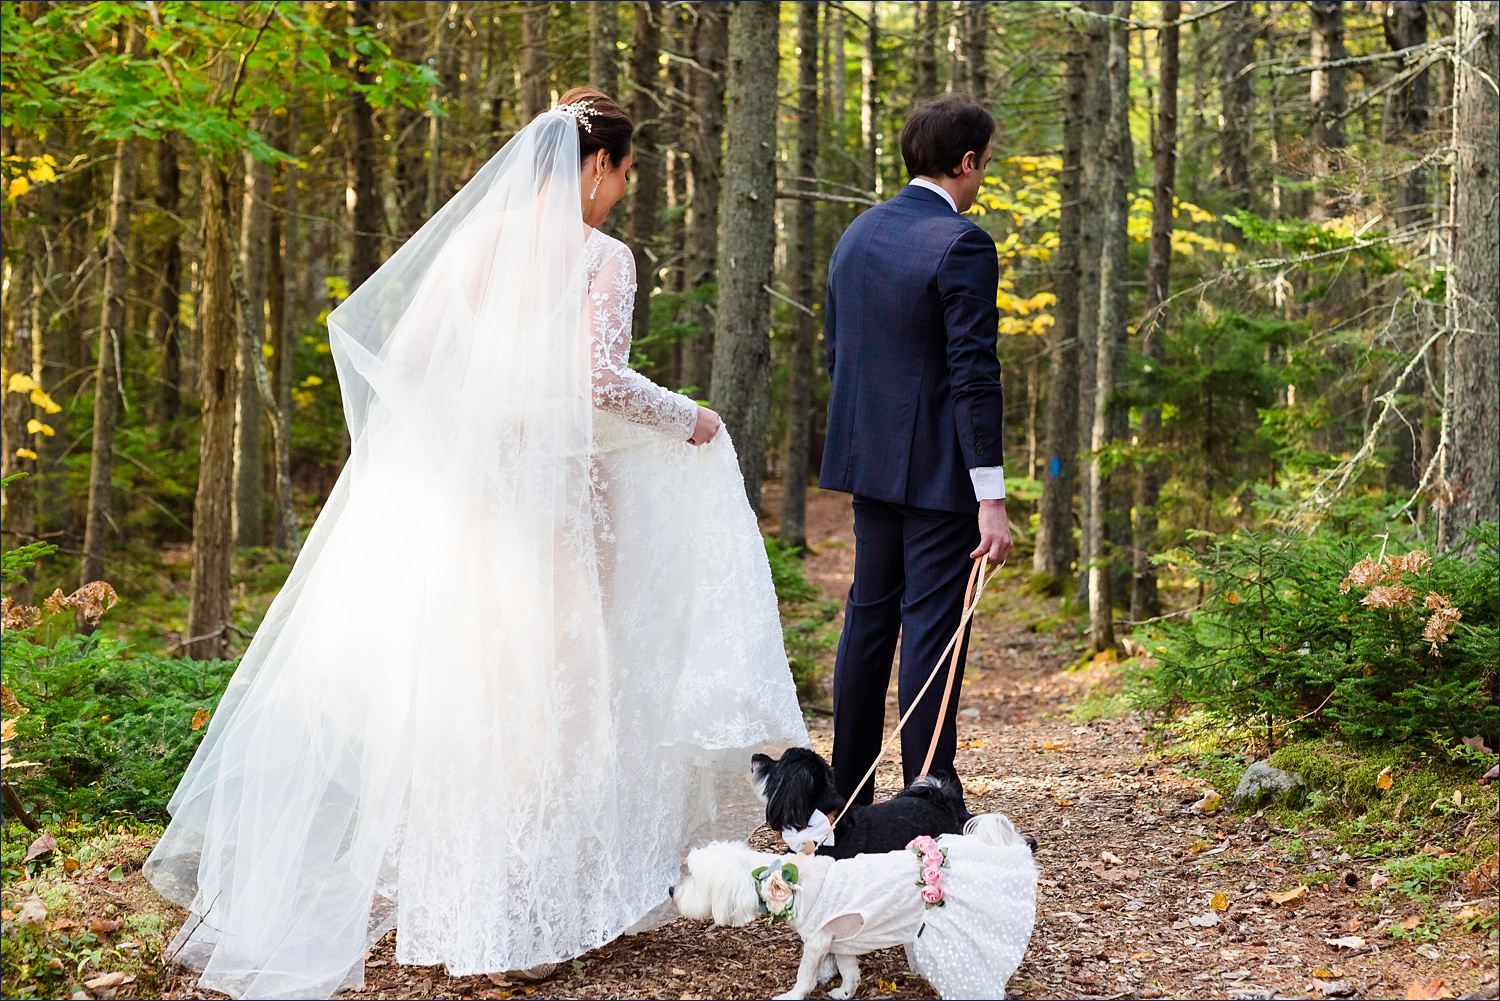 The bride greets the groom at their wedded first look with the couple's pups